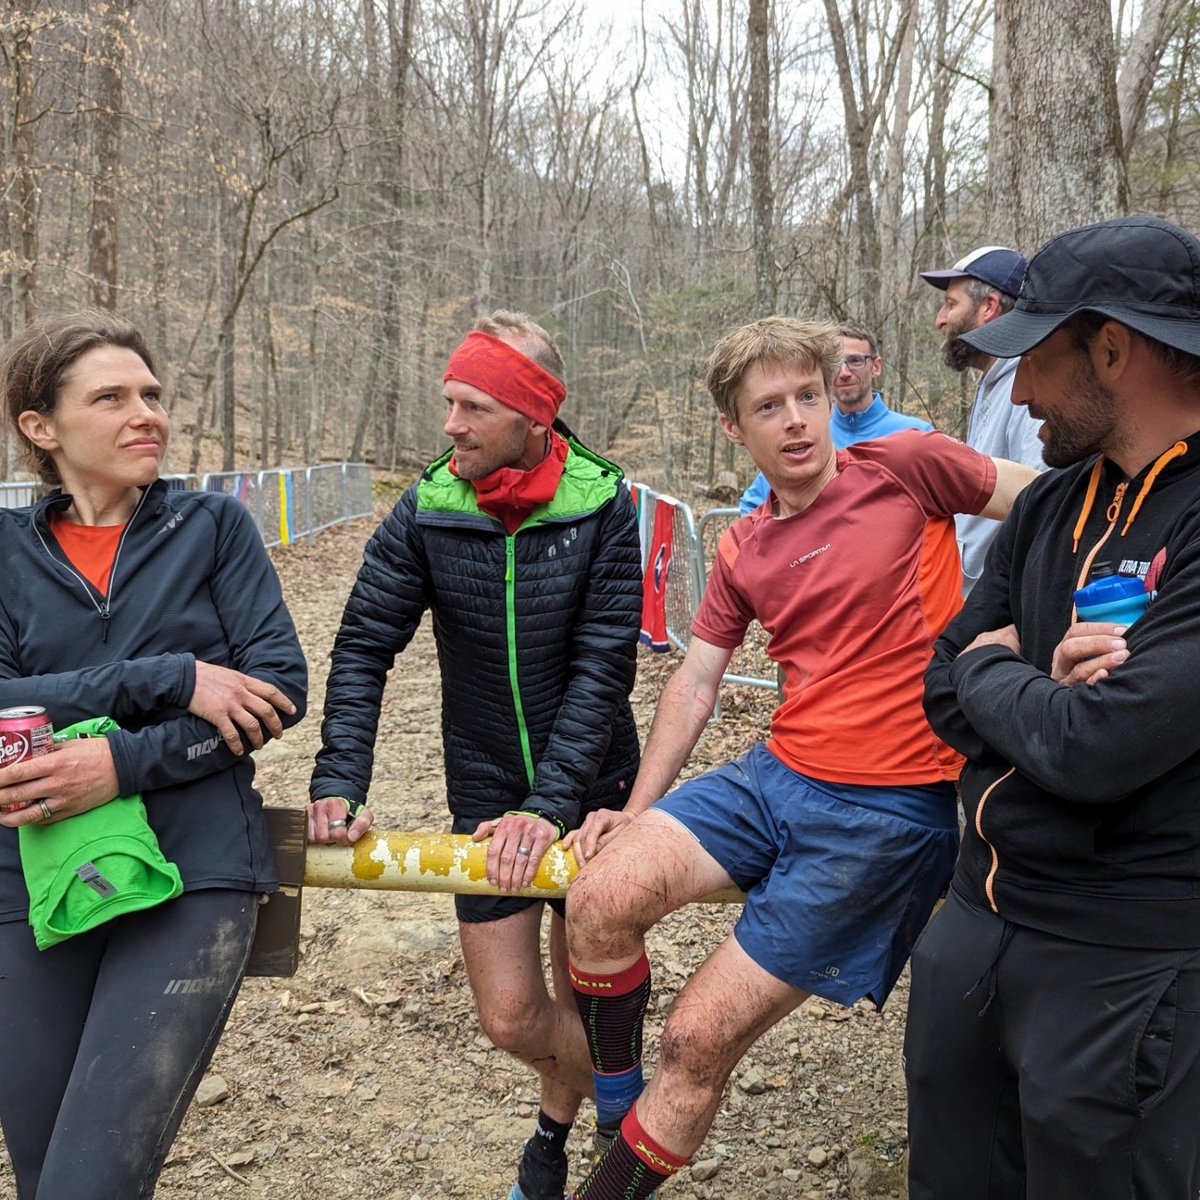 After 2 months I've finally written my usual long-winded post for this year's Barkley Marathons. Click the link for that, or just see the images here for my much more concise visual race report. #bm100
randomforestrunner.com/2024/03/2024-b…